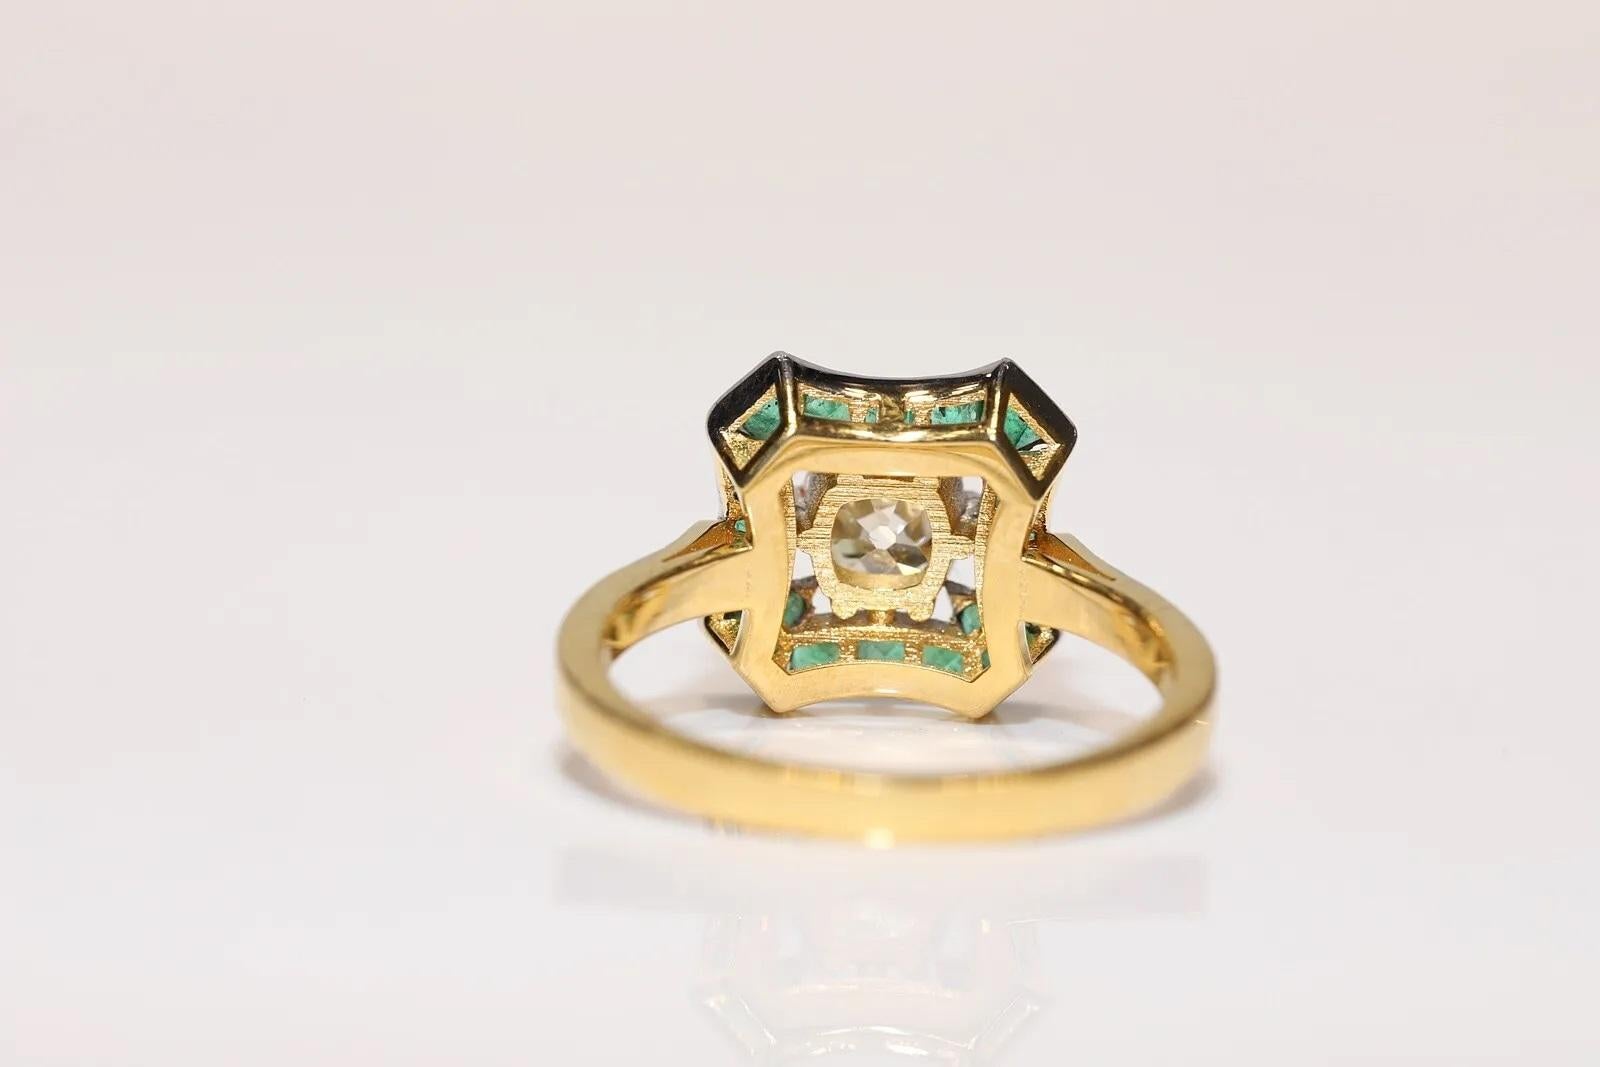 Modern New Made 14k Gold Natural Old Cut Diamond And Caliber Emerald Solitaire Ring For Sale